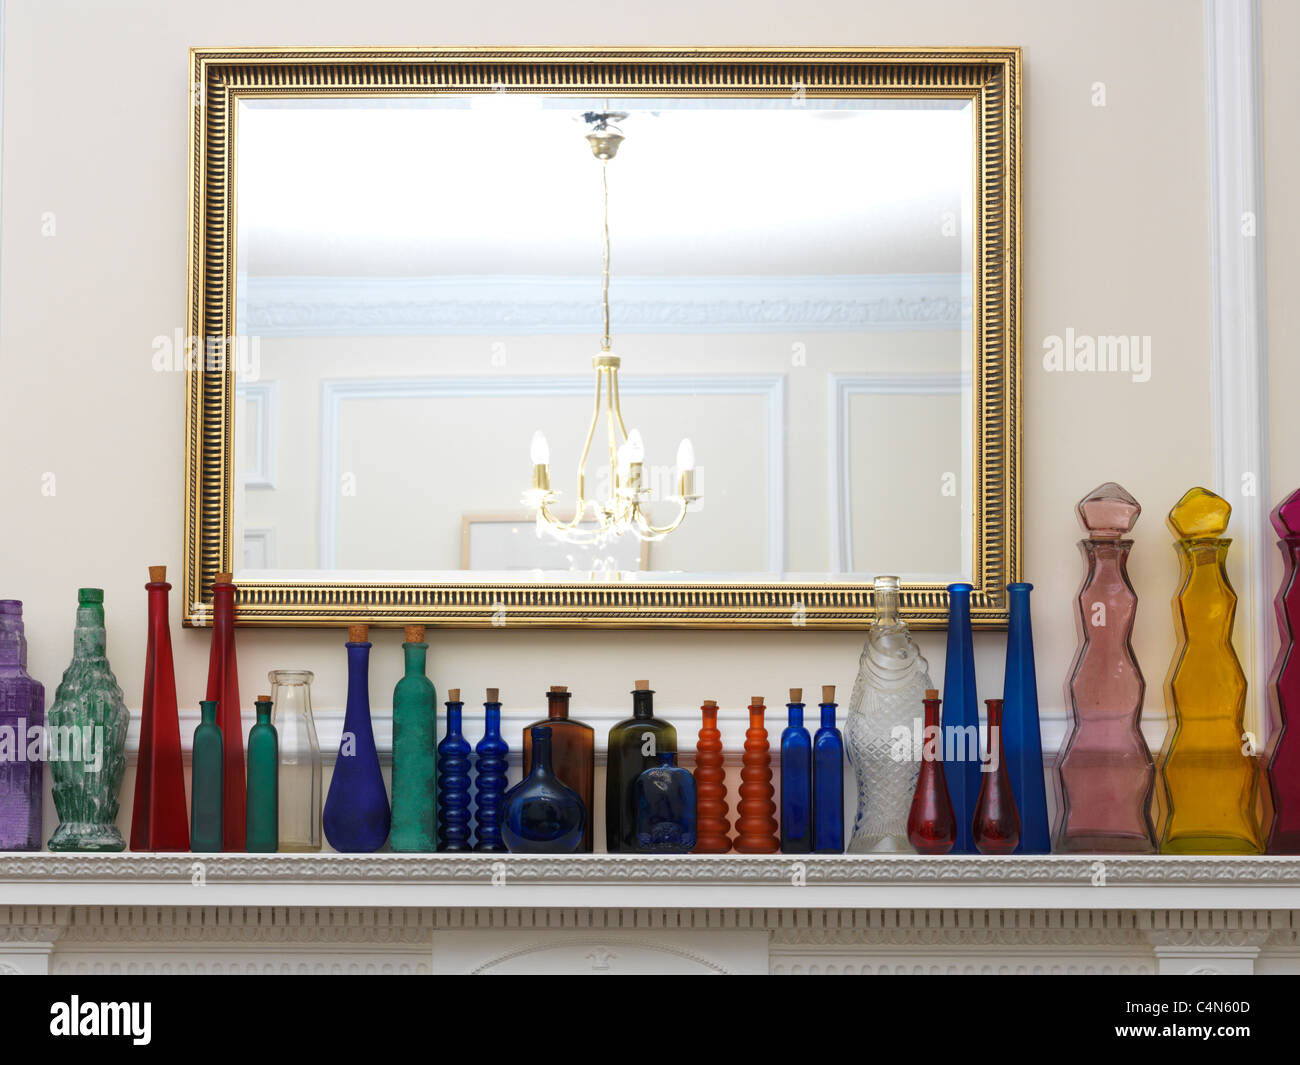 A Collection Of Glass Bottles All Different Shapes, Sizes And Colours In A Row On A Mantlepiece Stock Photo